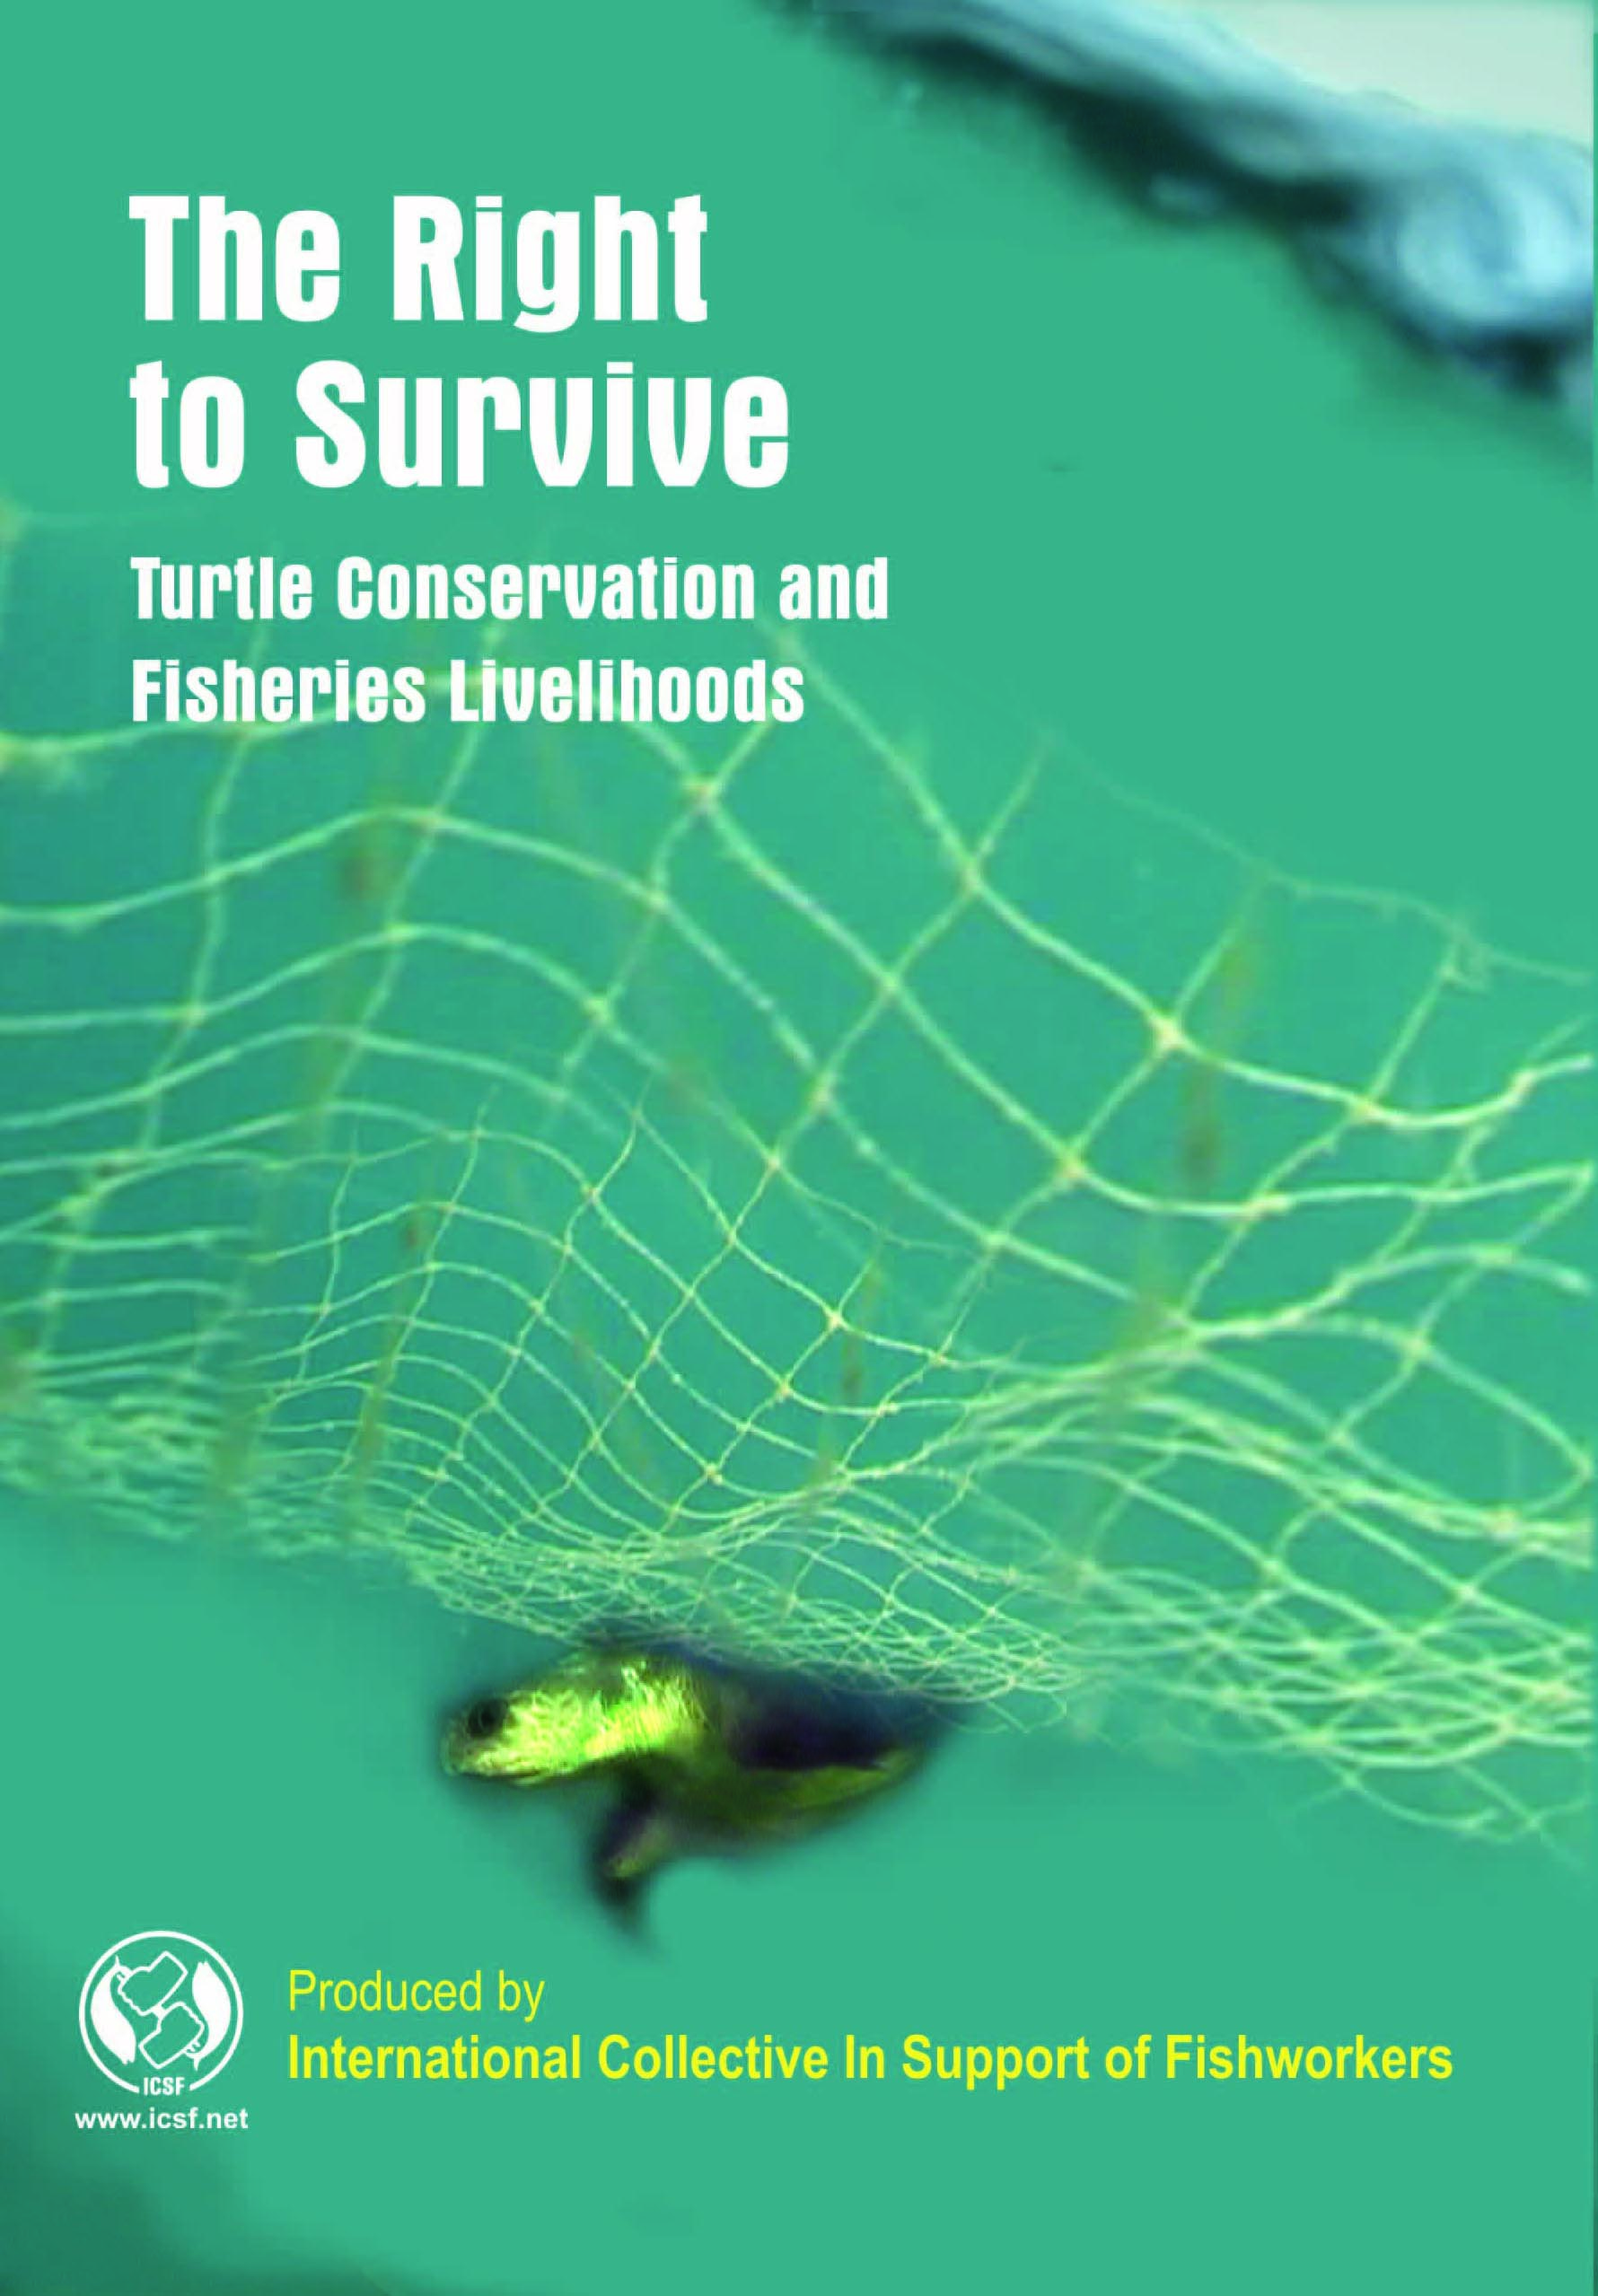 Film – Right to survive: Turtle conservation and fisheries livelihoods